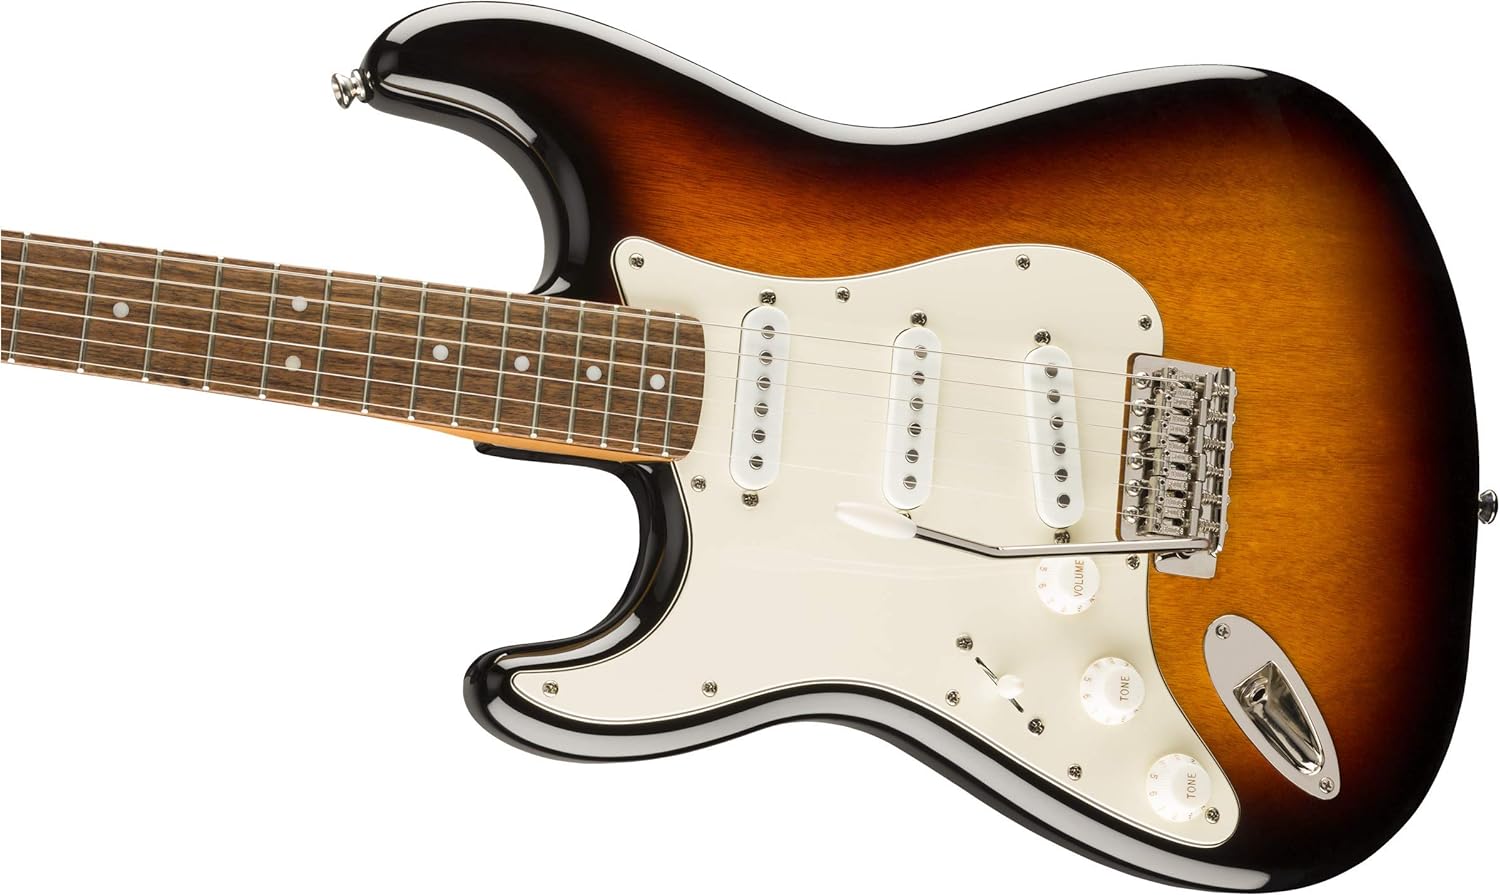 Squier Classic Vibe 60s Stratocaster Electric Guitar Review